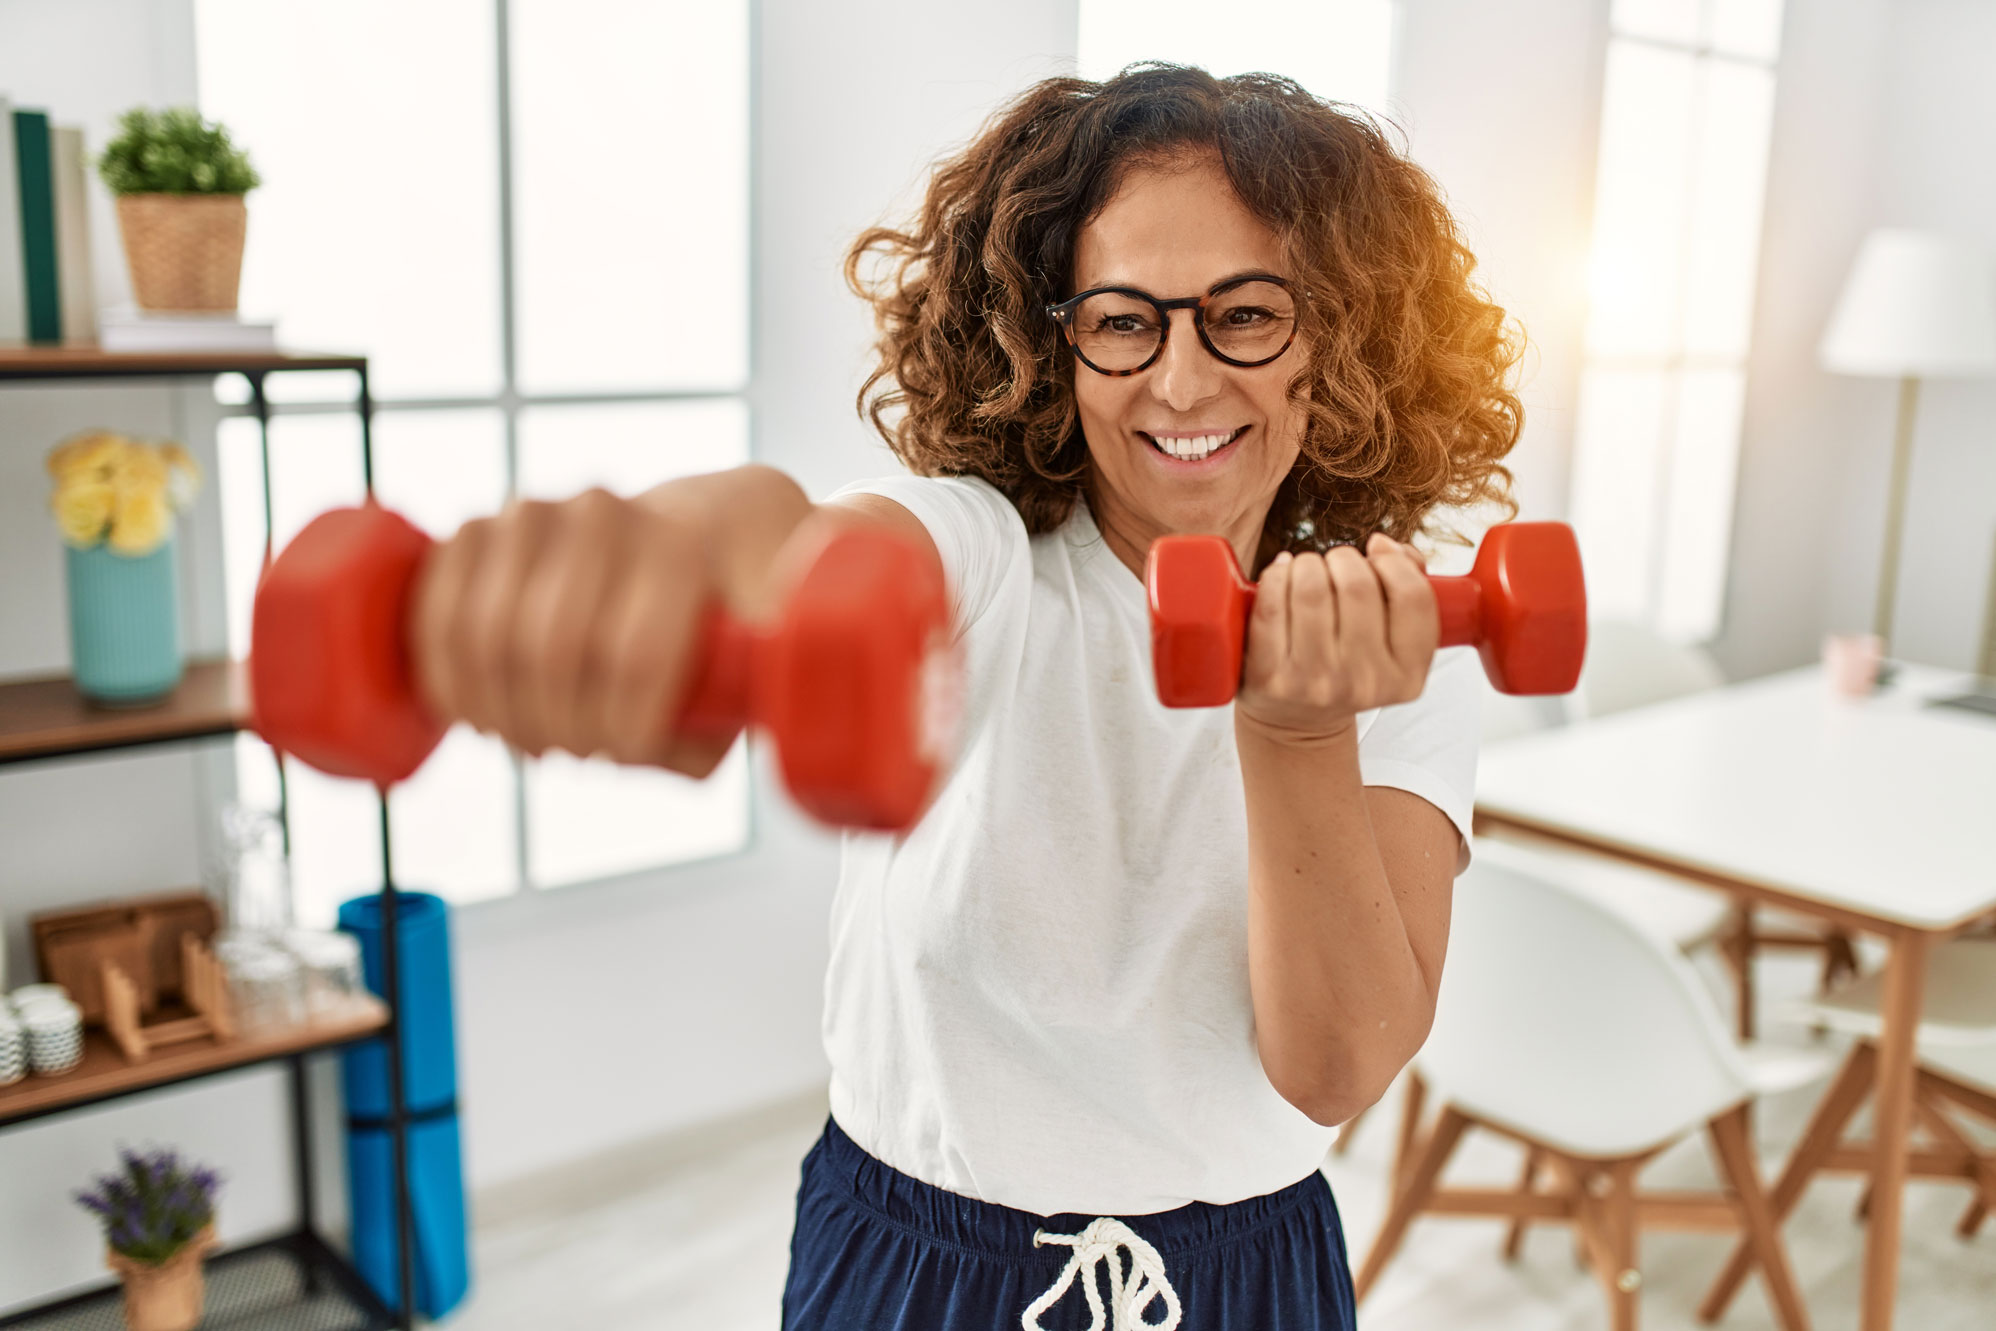 middle aged women on hormone therapy builds muscle with hand weights